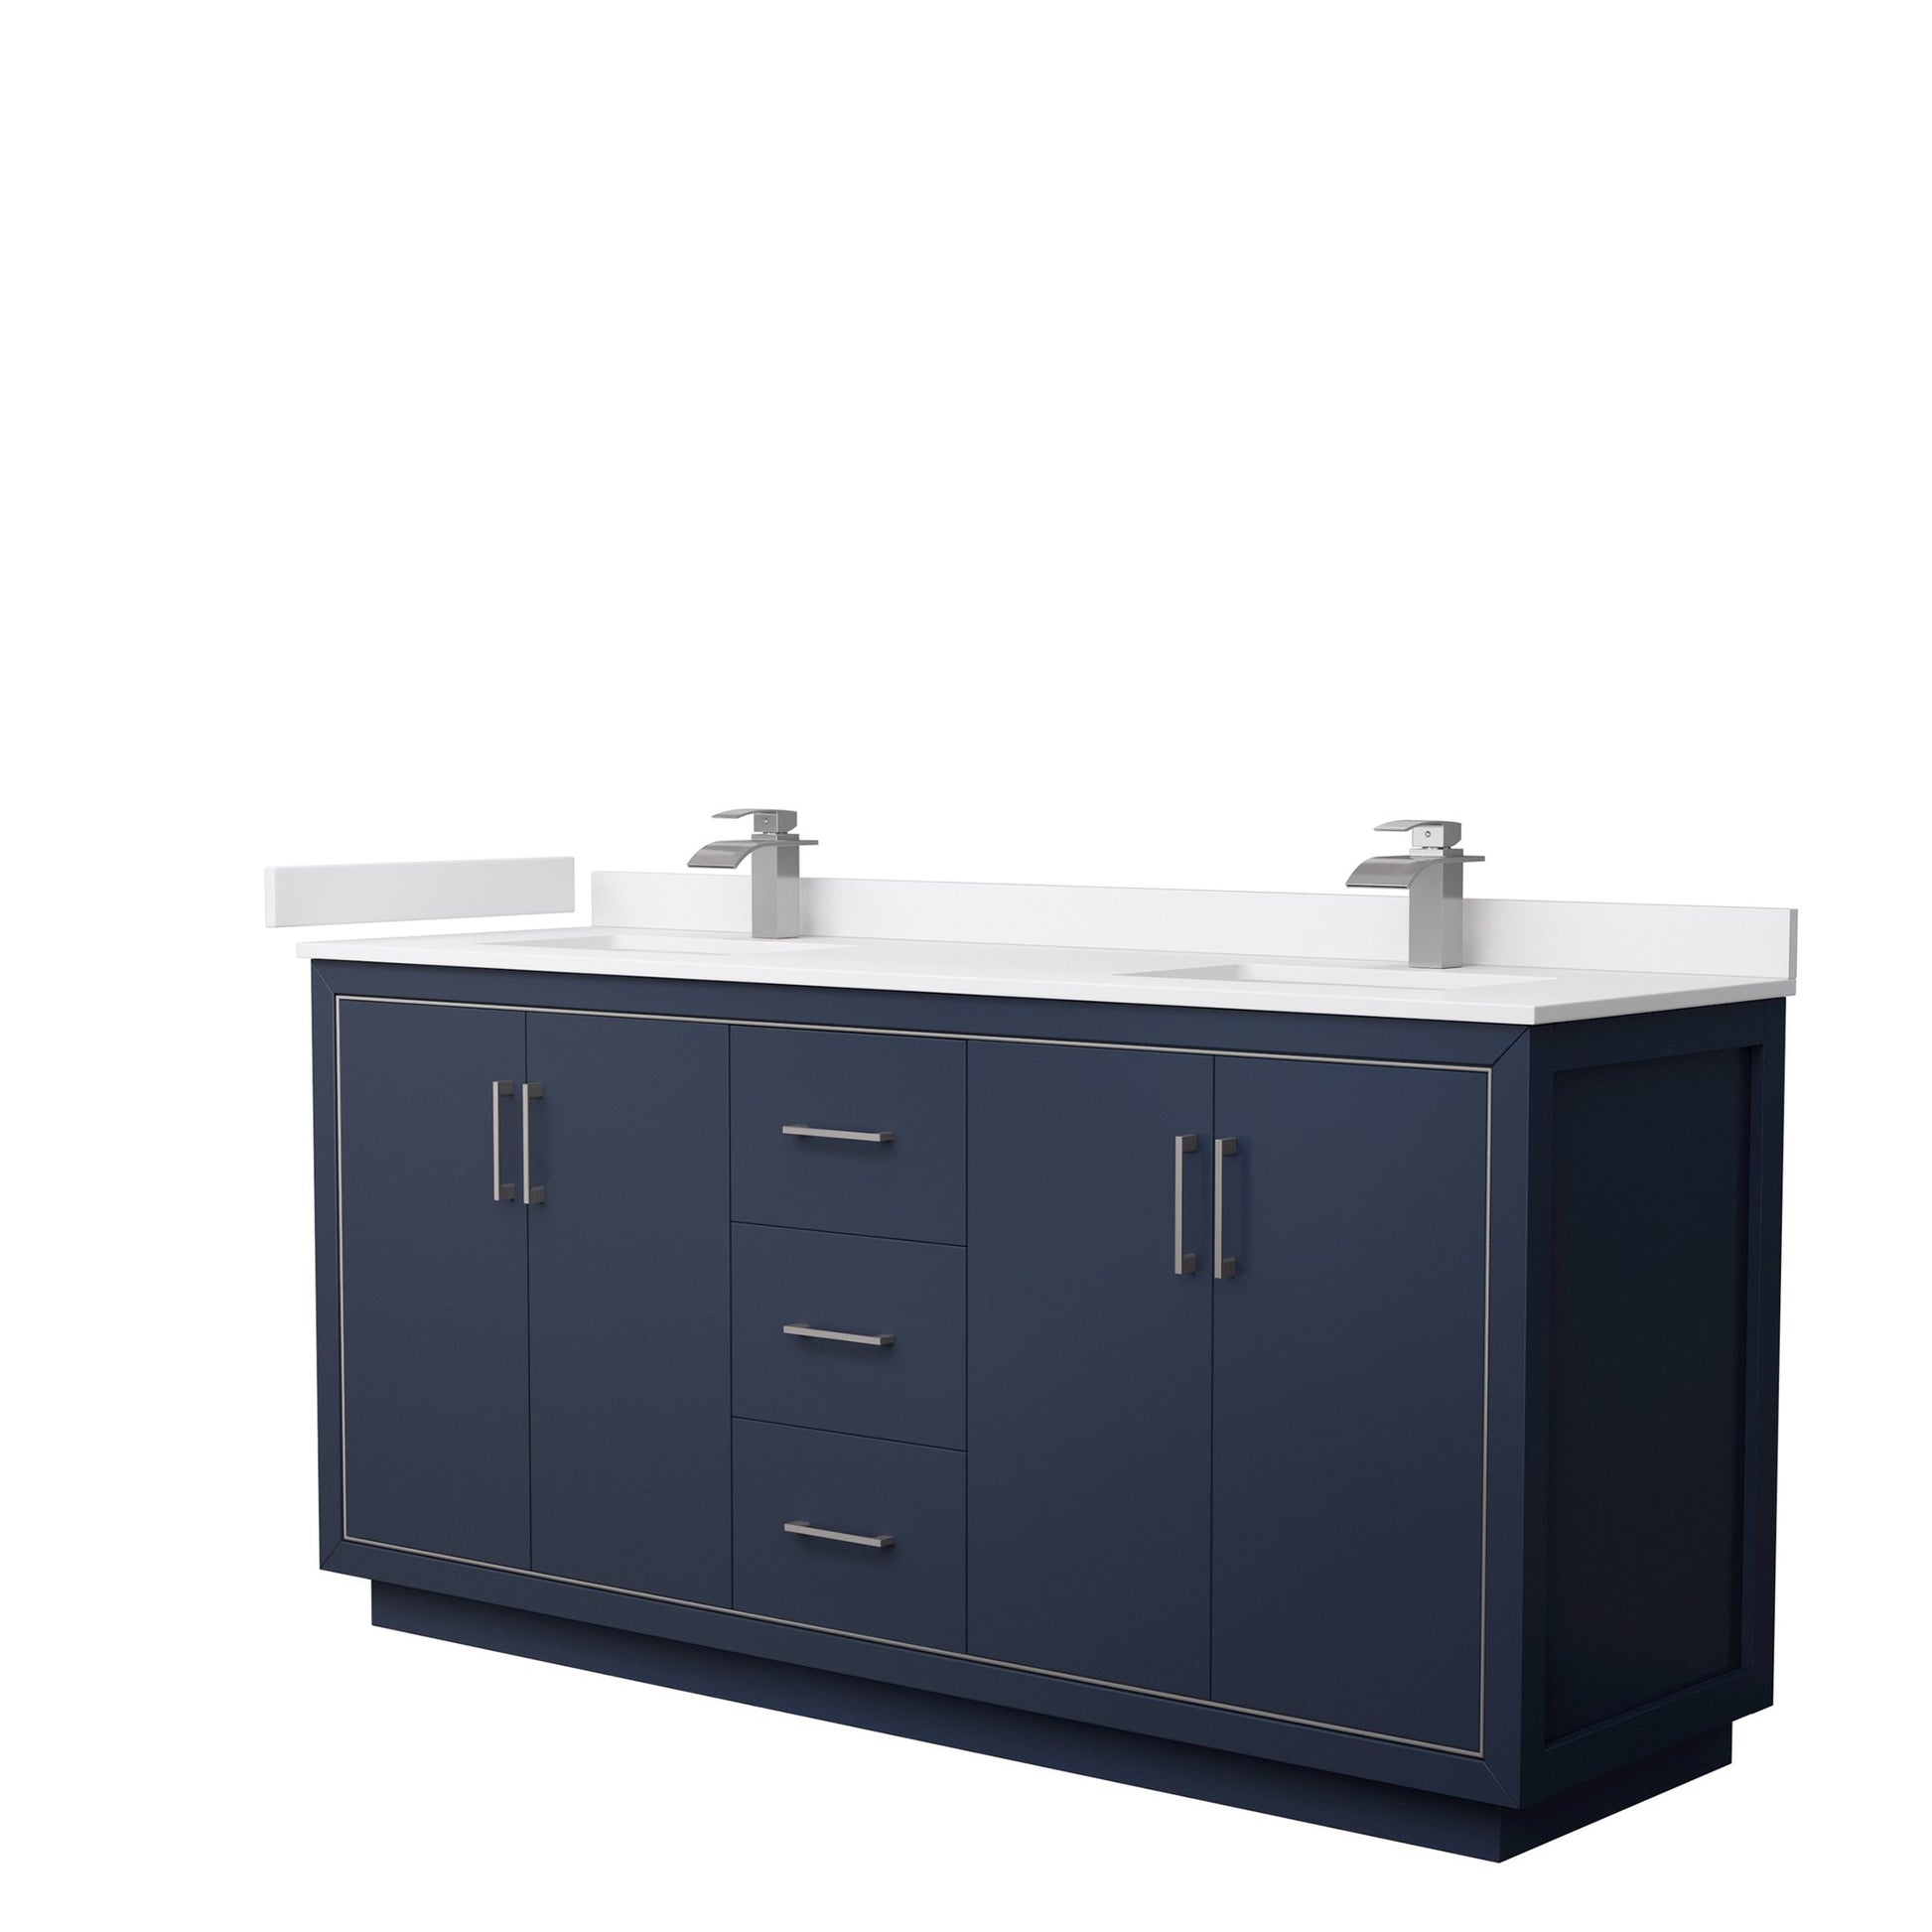 Wyndham Collection Icon 72" Double Bathroom Vanity in Dark Blue, White Cultured Marble Countertop, Undermount Square Sinks, Brushed Nickel Trim